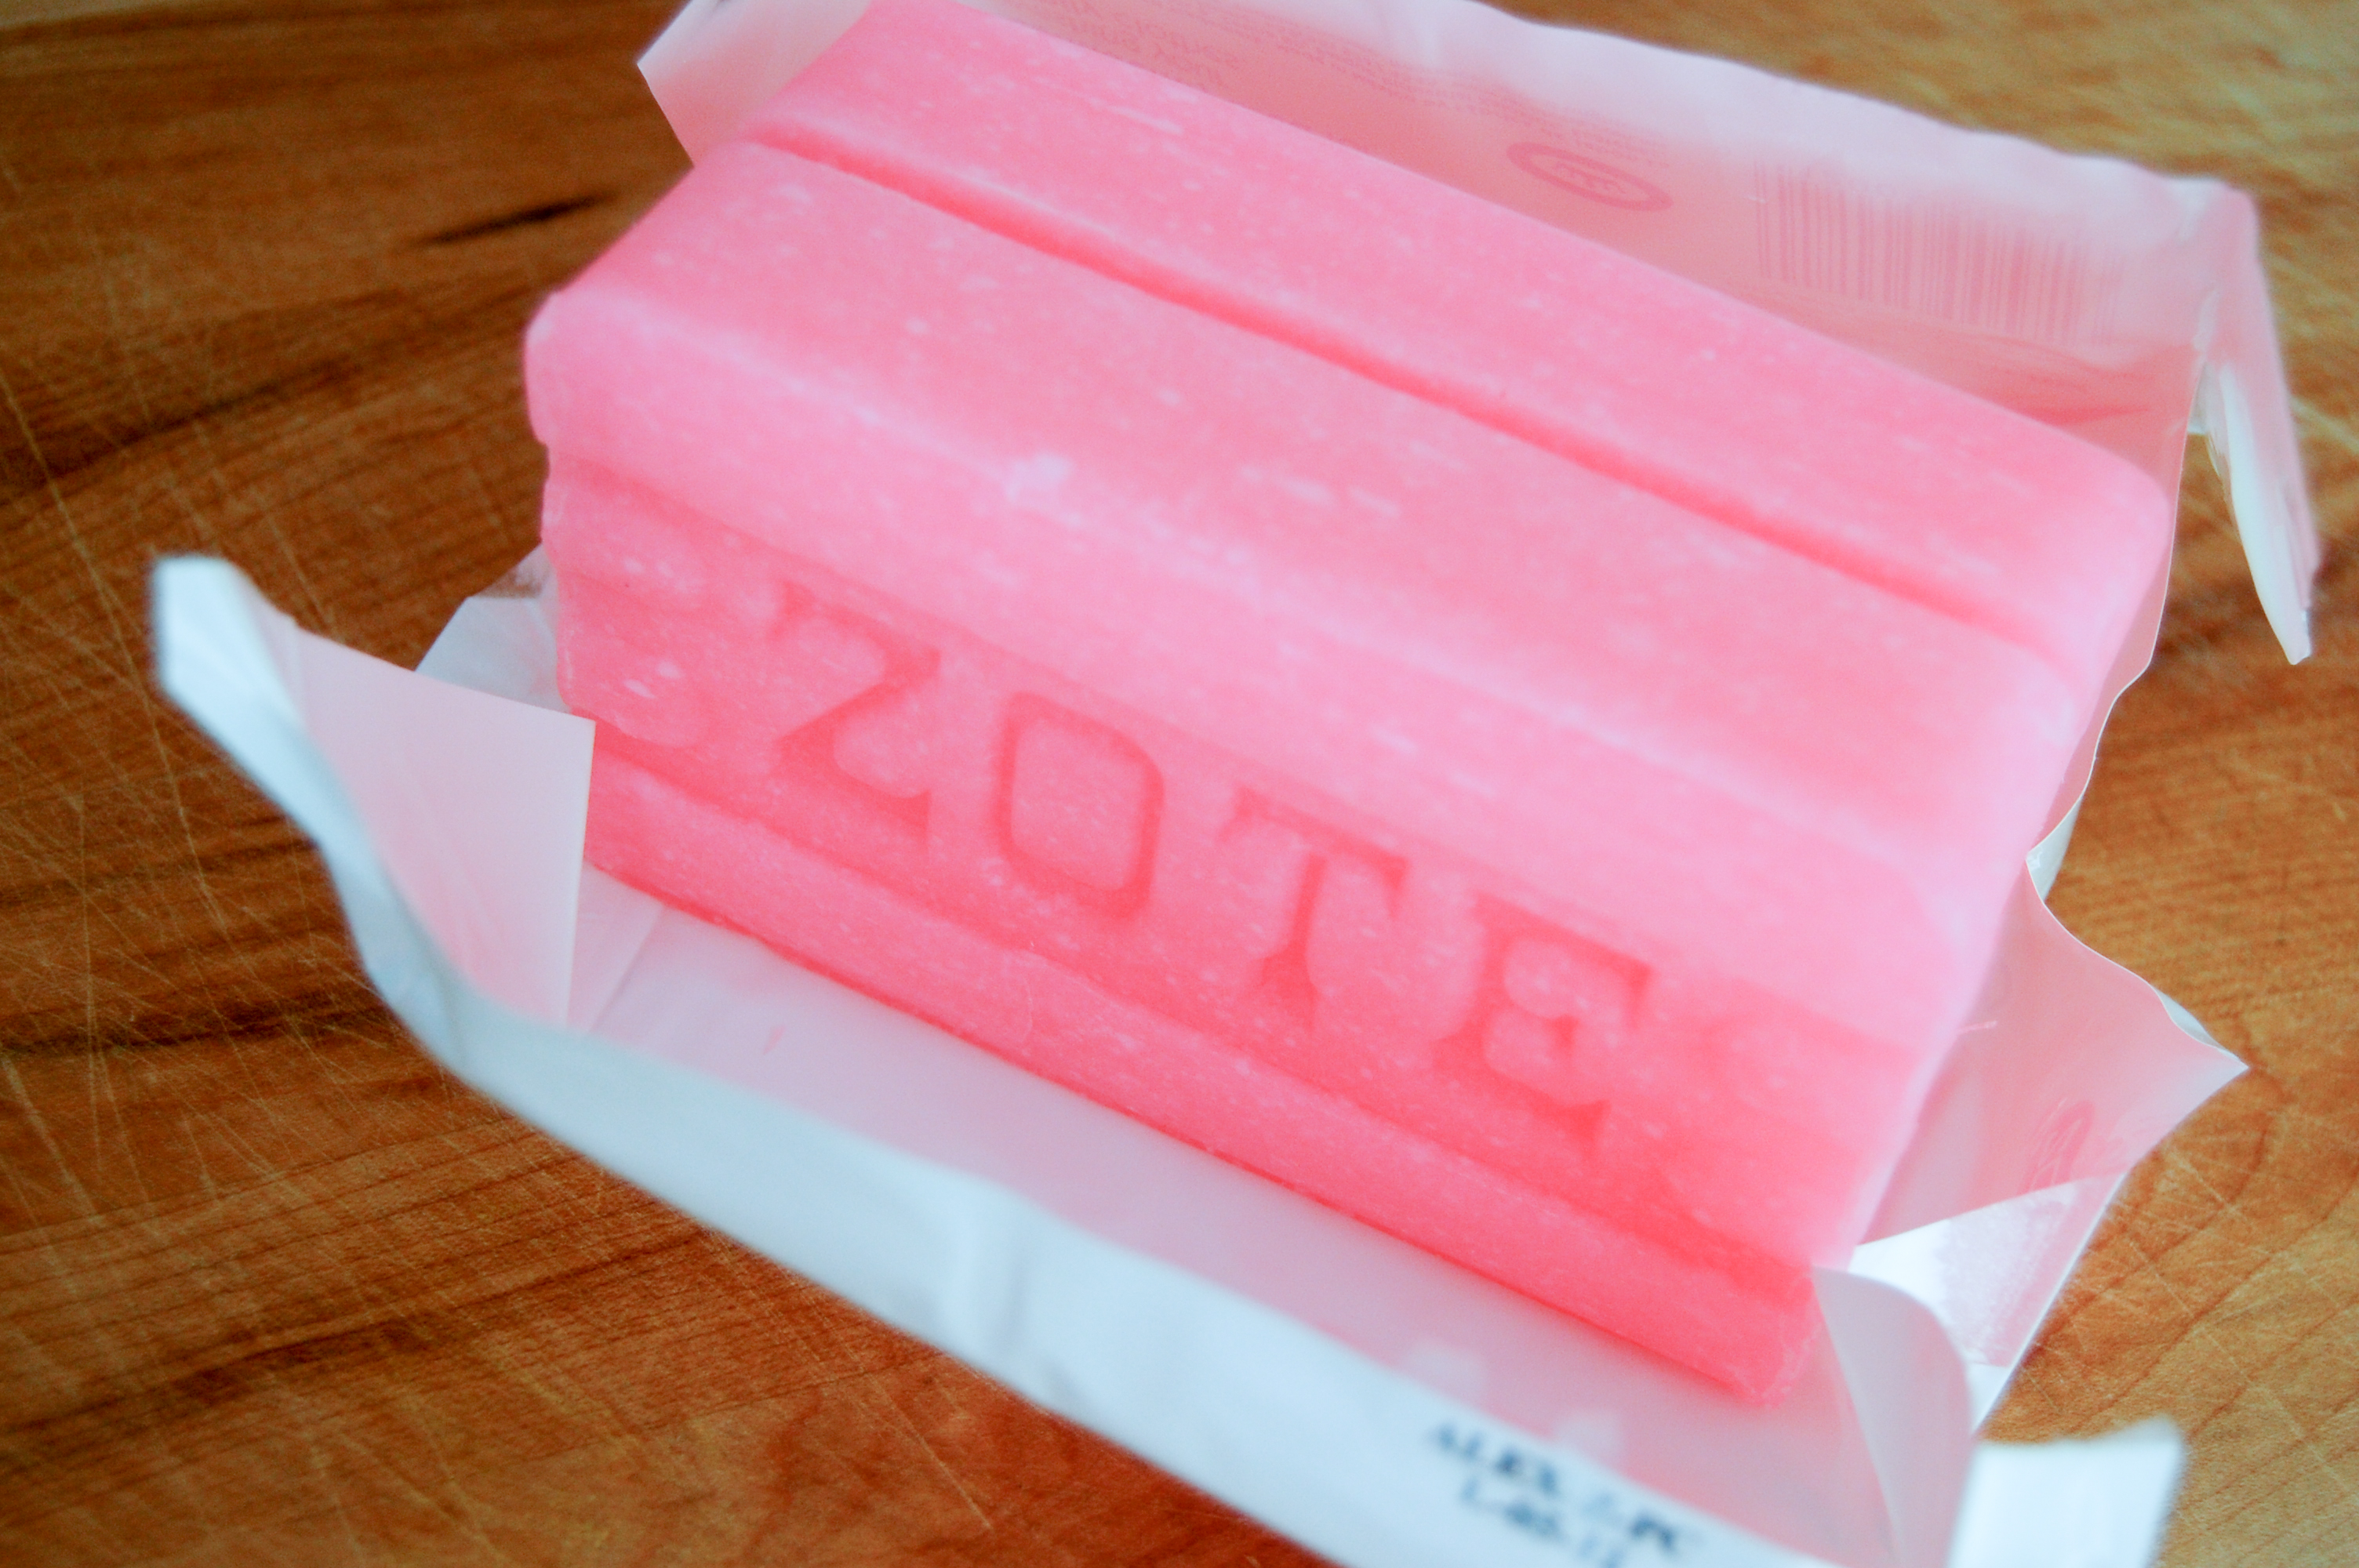 How do you use a Zote laundry soap bar?